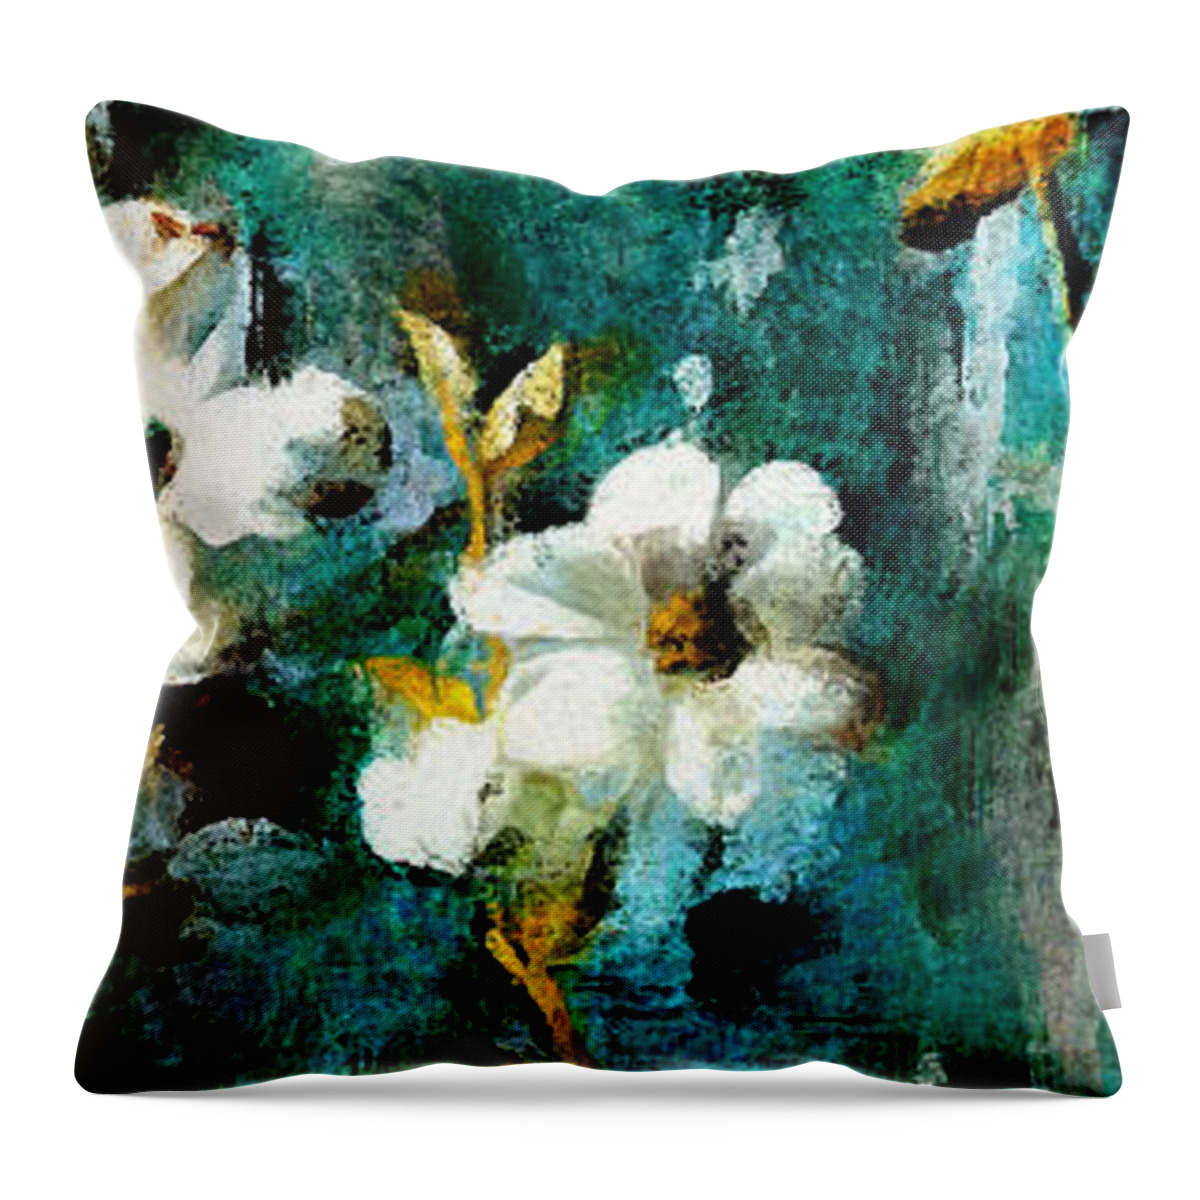 Abstract Throw Pillow featuring the digital art Flowers #5 by Galeria Trompiz